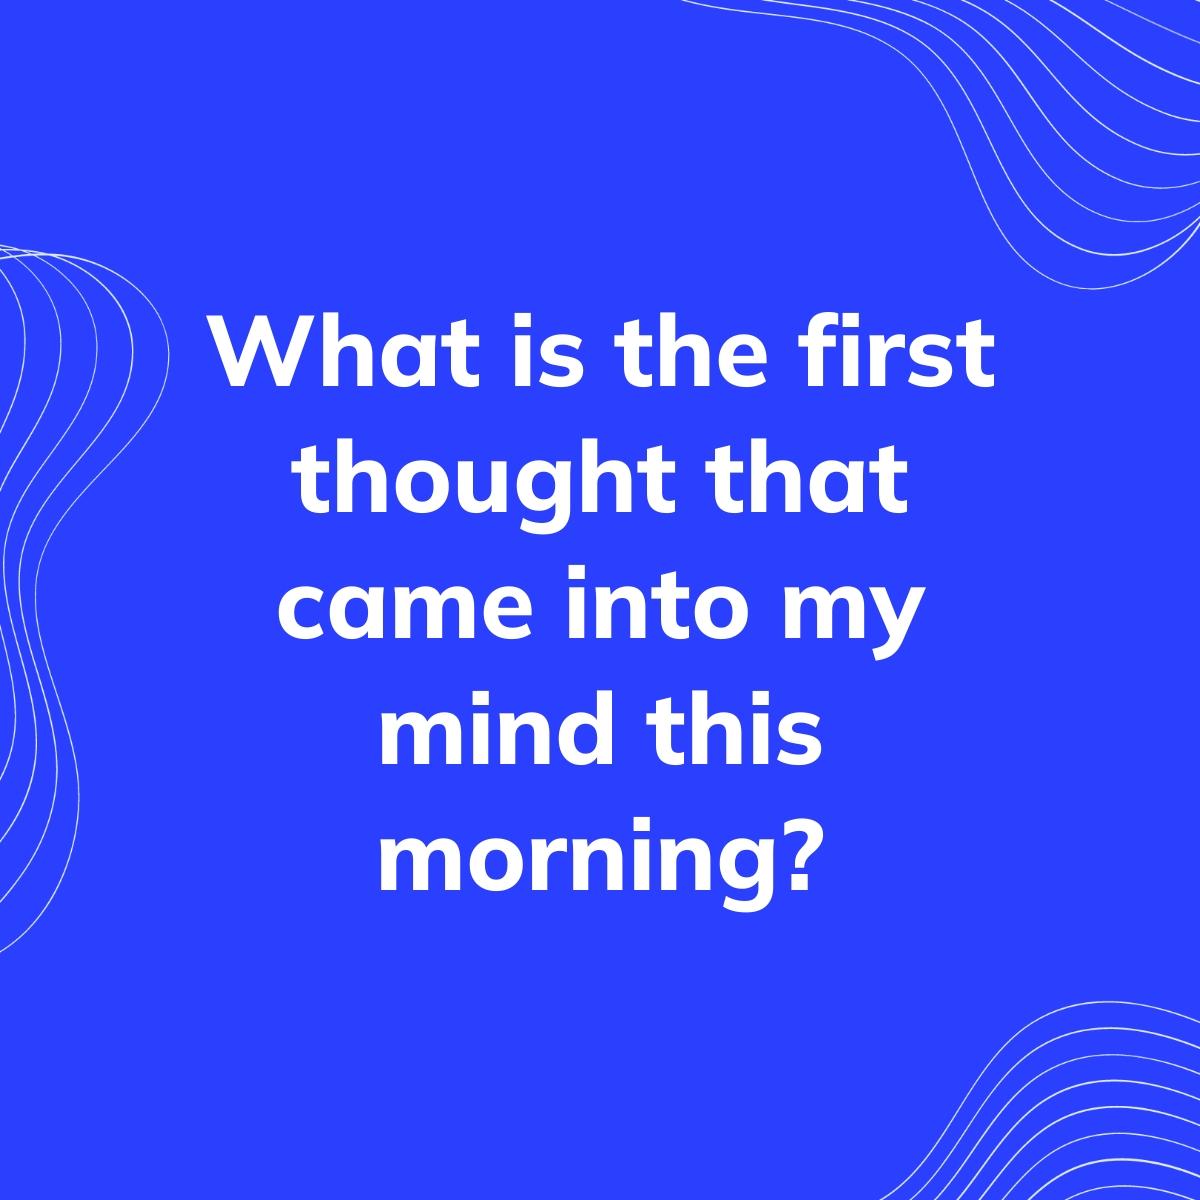 Journal Prompt: What is the first thought that came into my mind this morning?